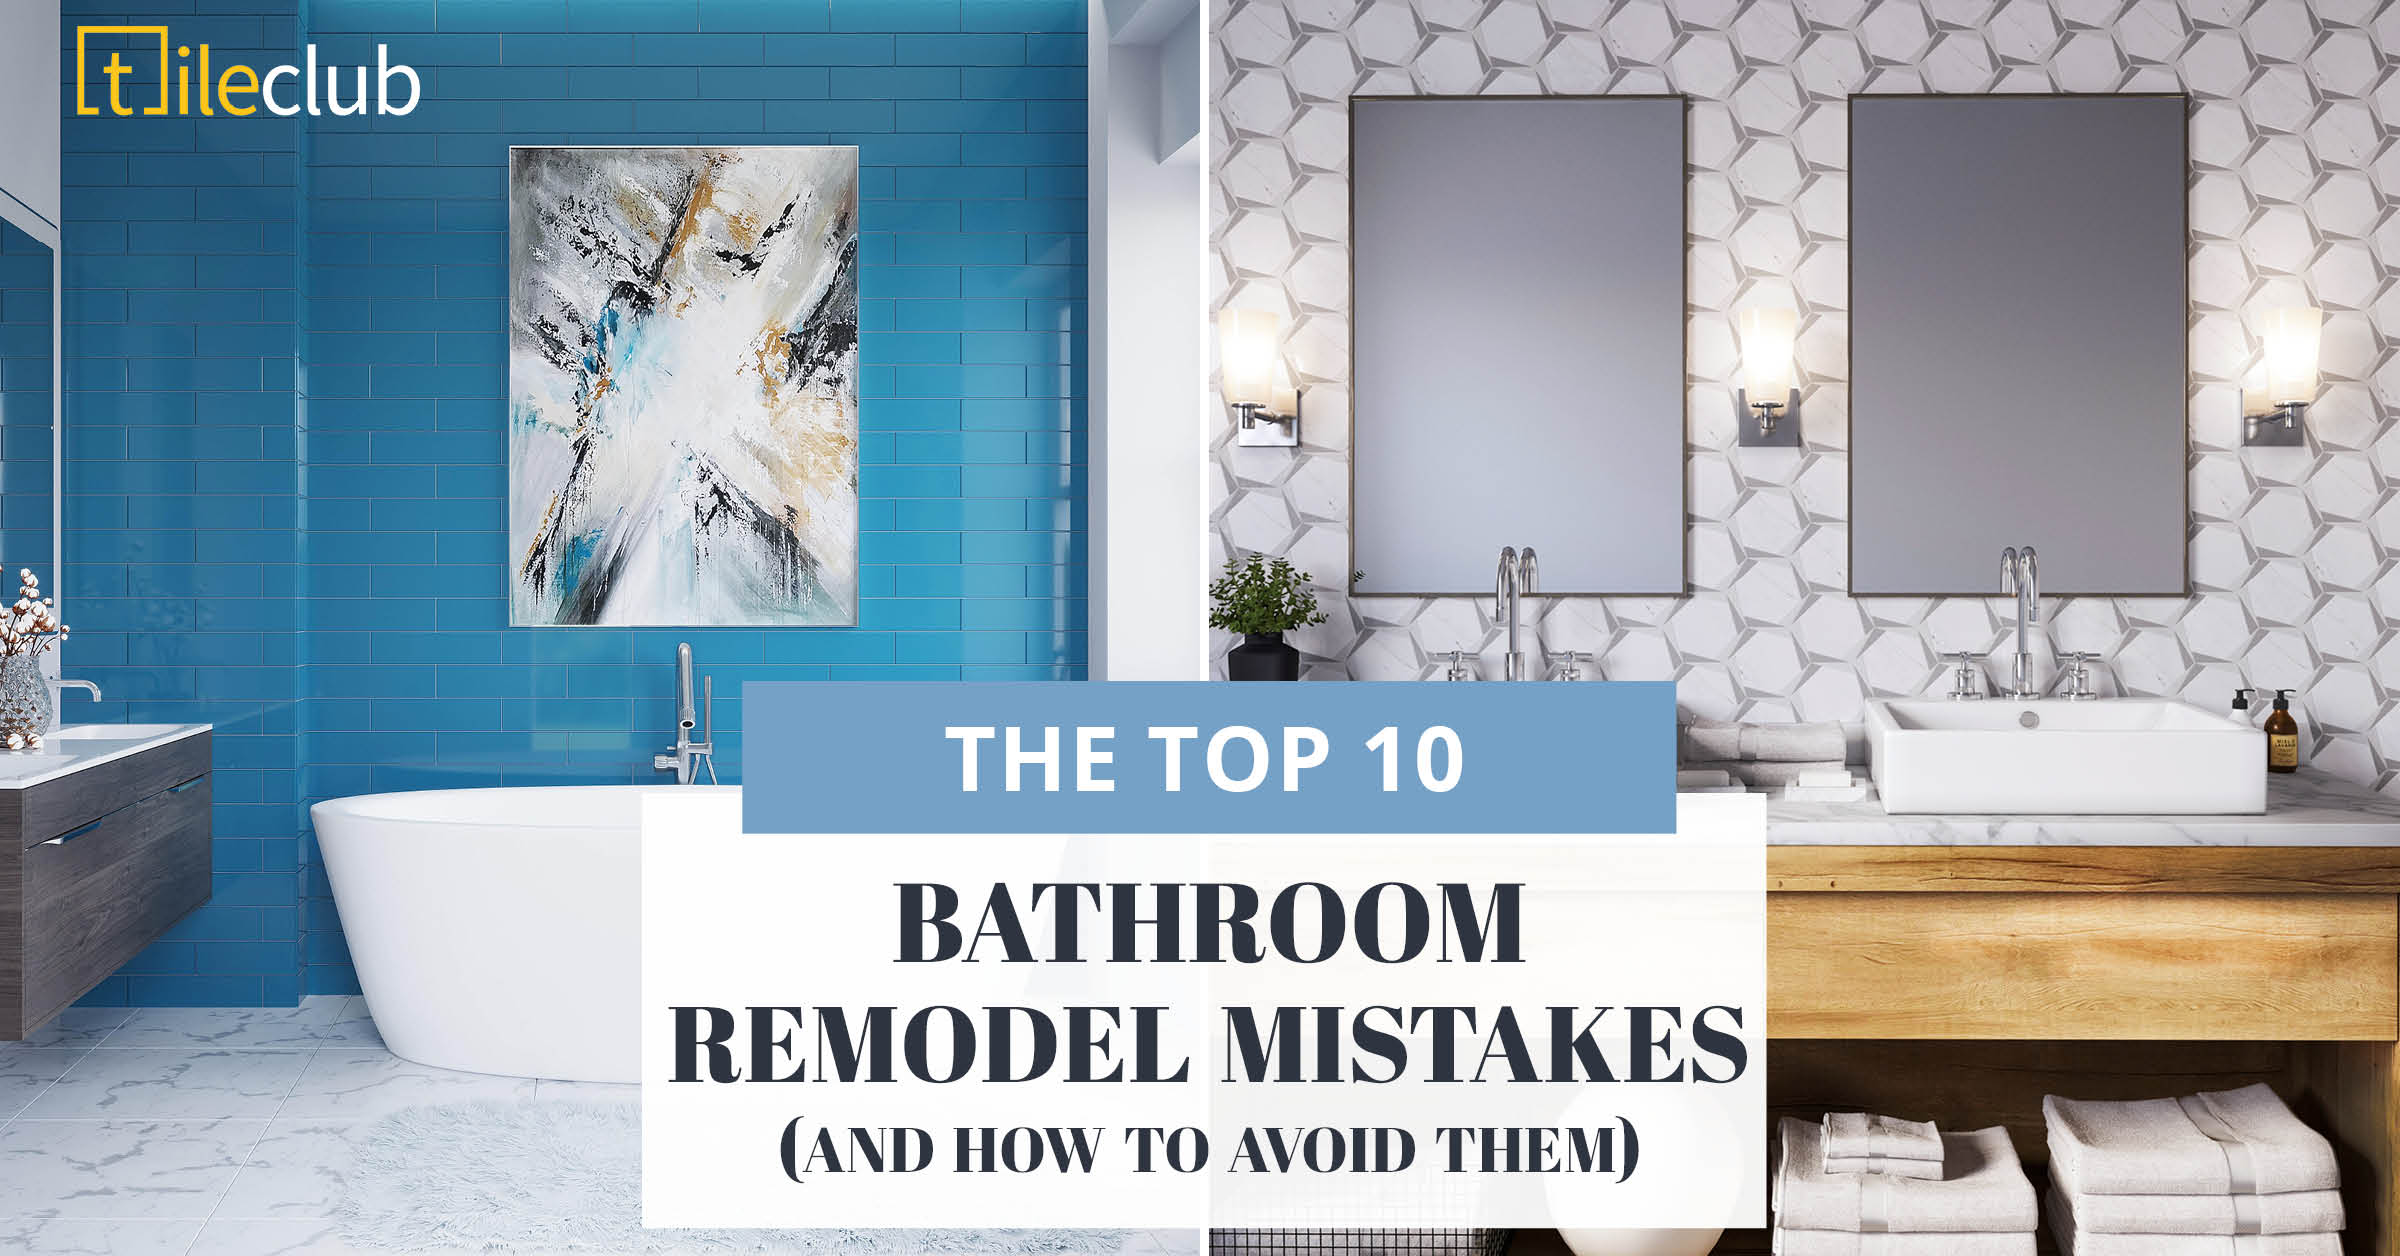 10 Common Bathroom Remodel Mistakes and How to Avoid Them